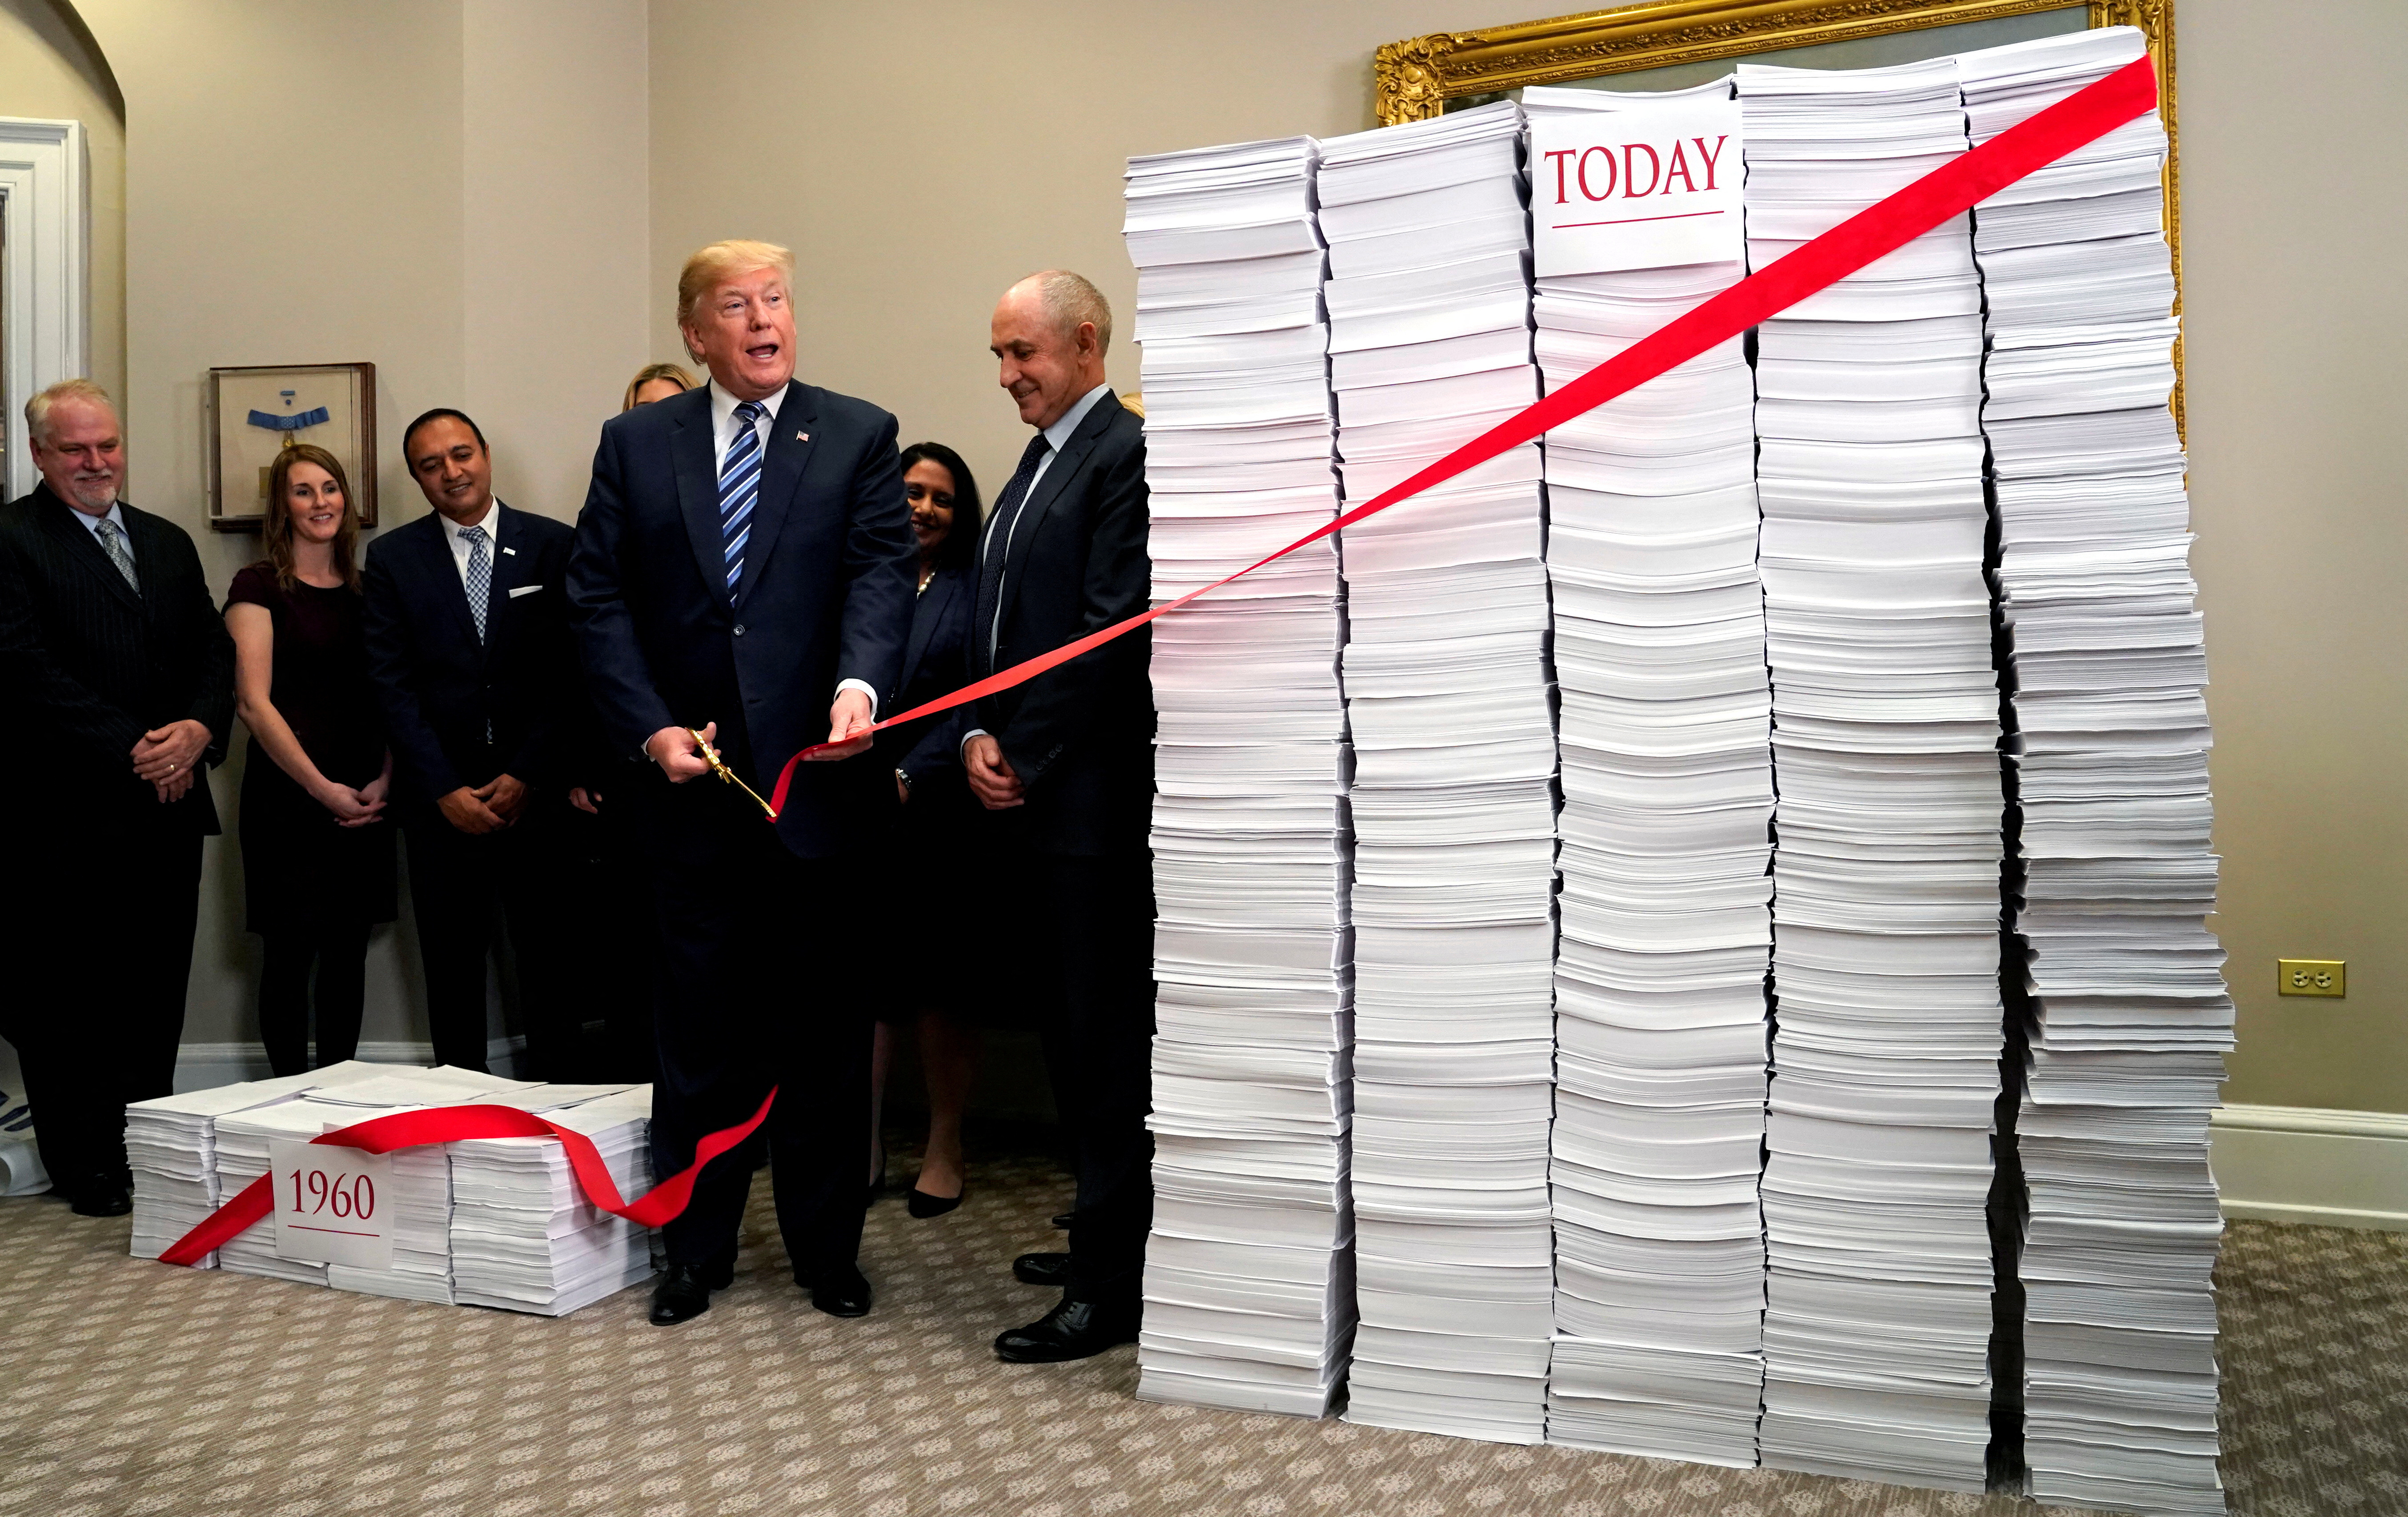 U.S. President Donald Trump cuts a red tape while speaking about deregulation at the White House in Washington